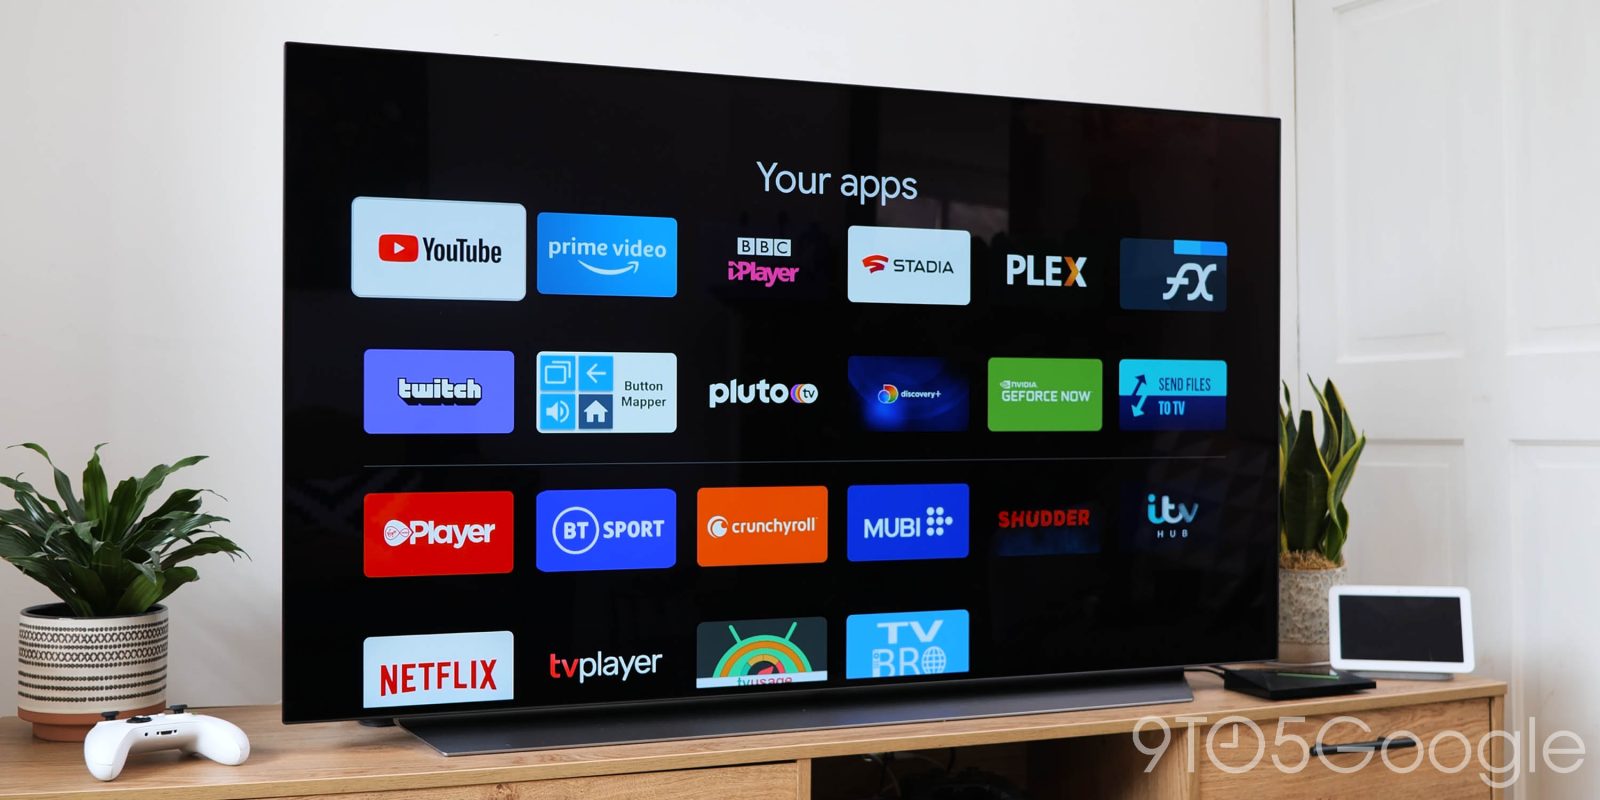 Android TV: Must-have apps for 2022 [Video]